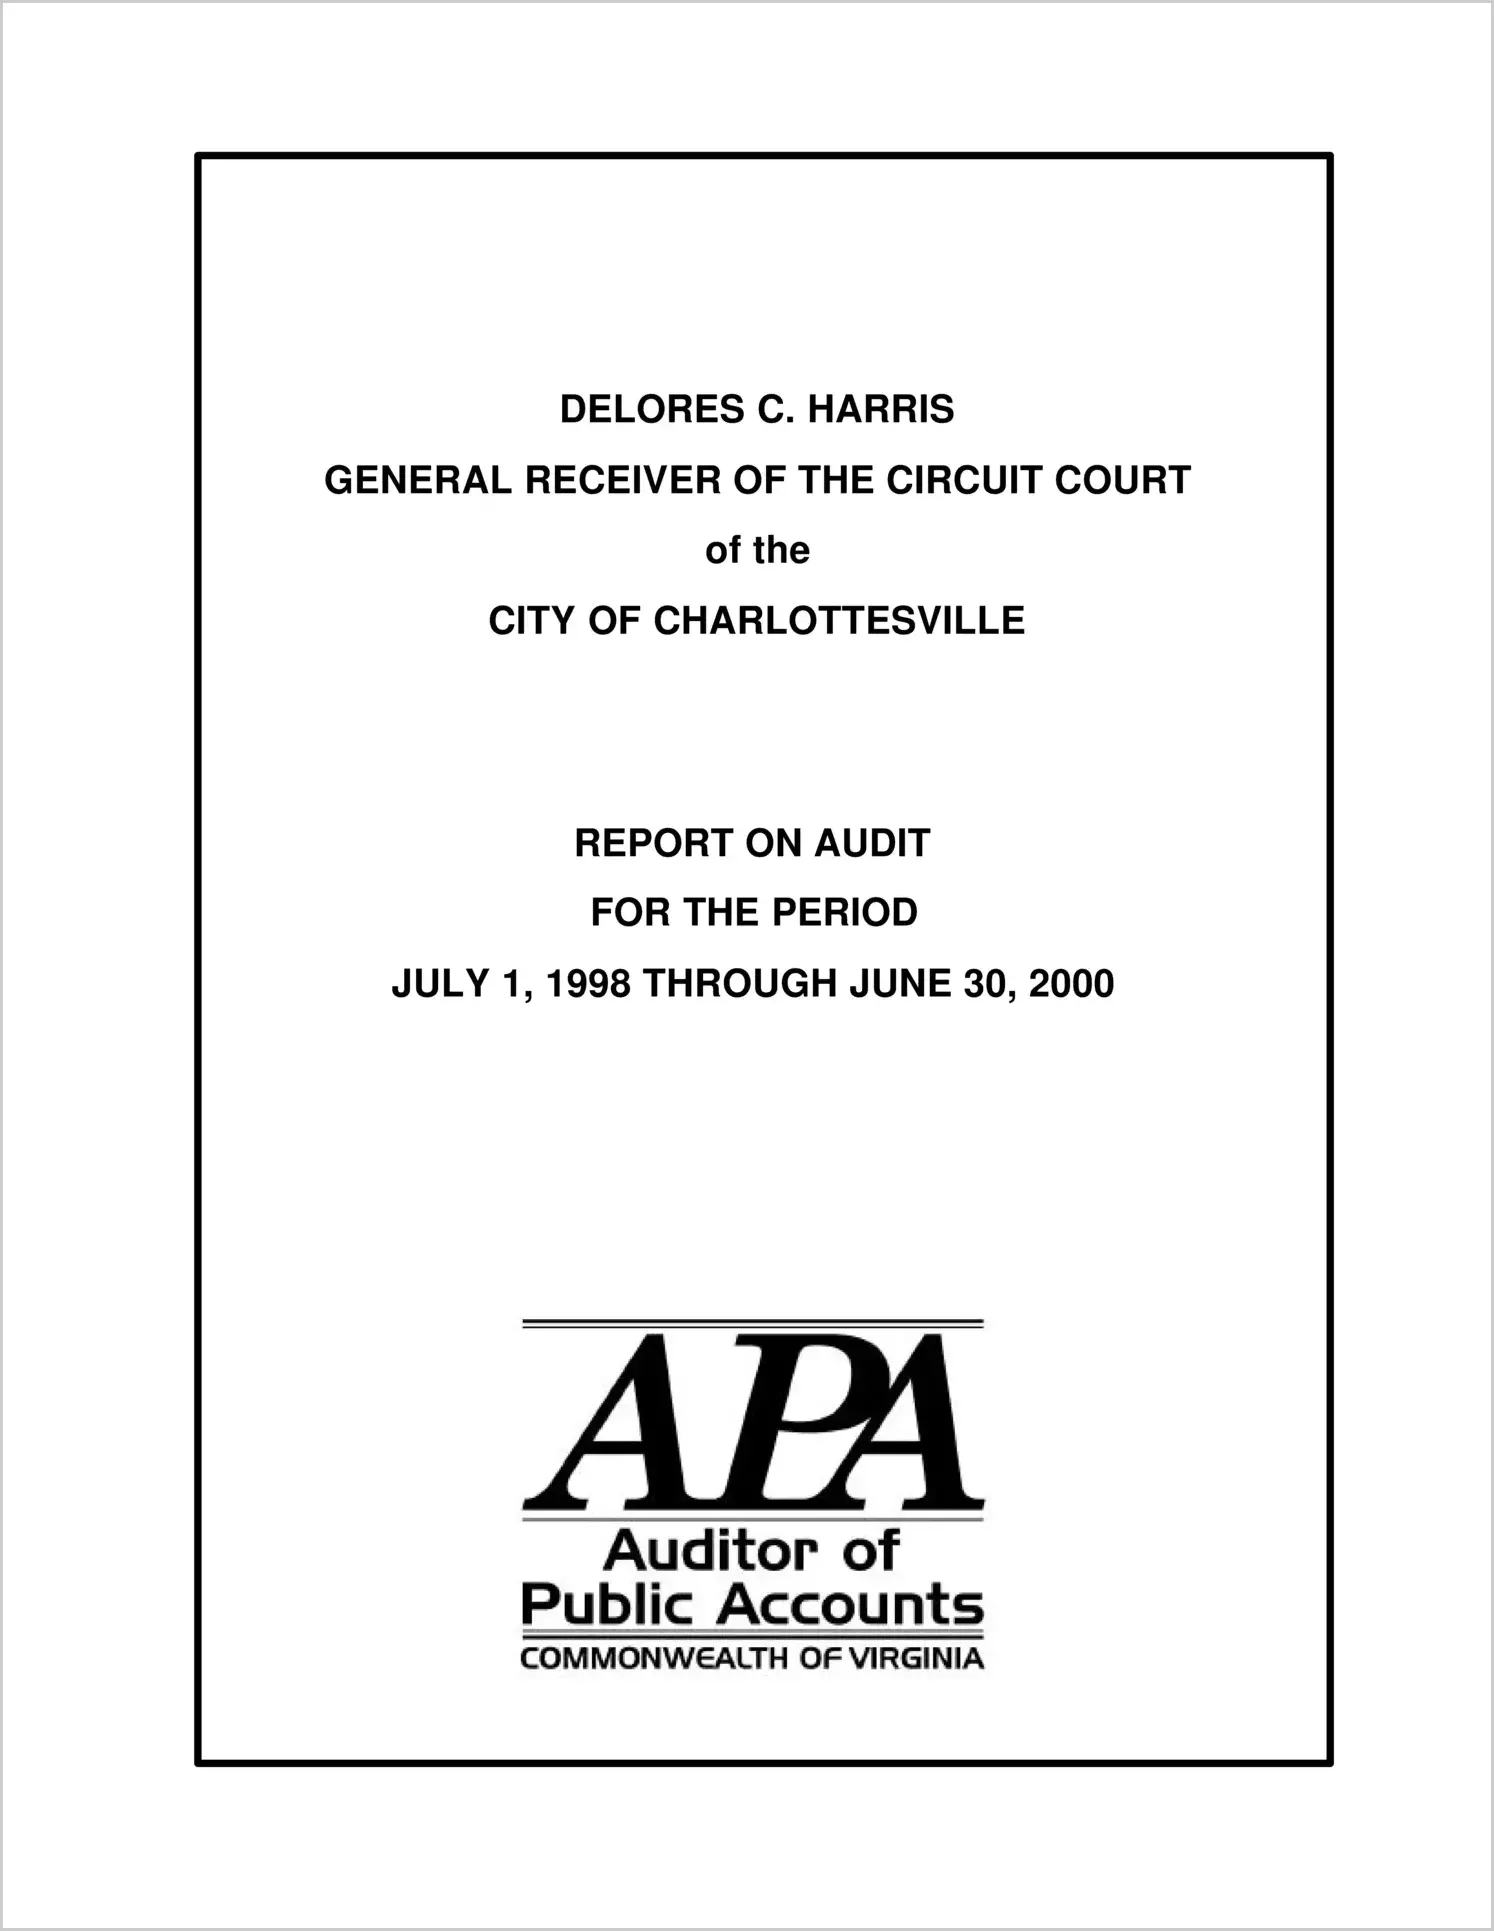 General Receiver of the Circuit Court of the City of Charlottesvile for the period July 1, 1998 through June 30, 2000